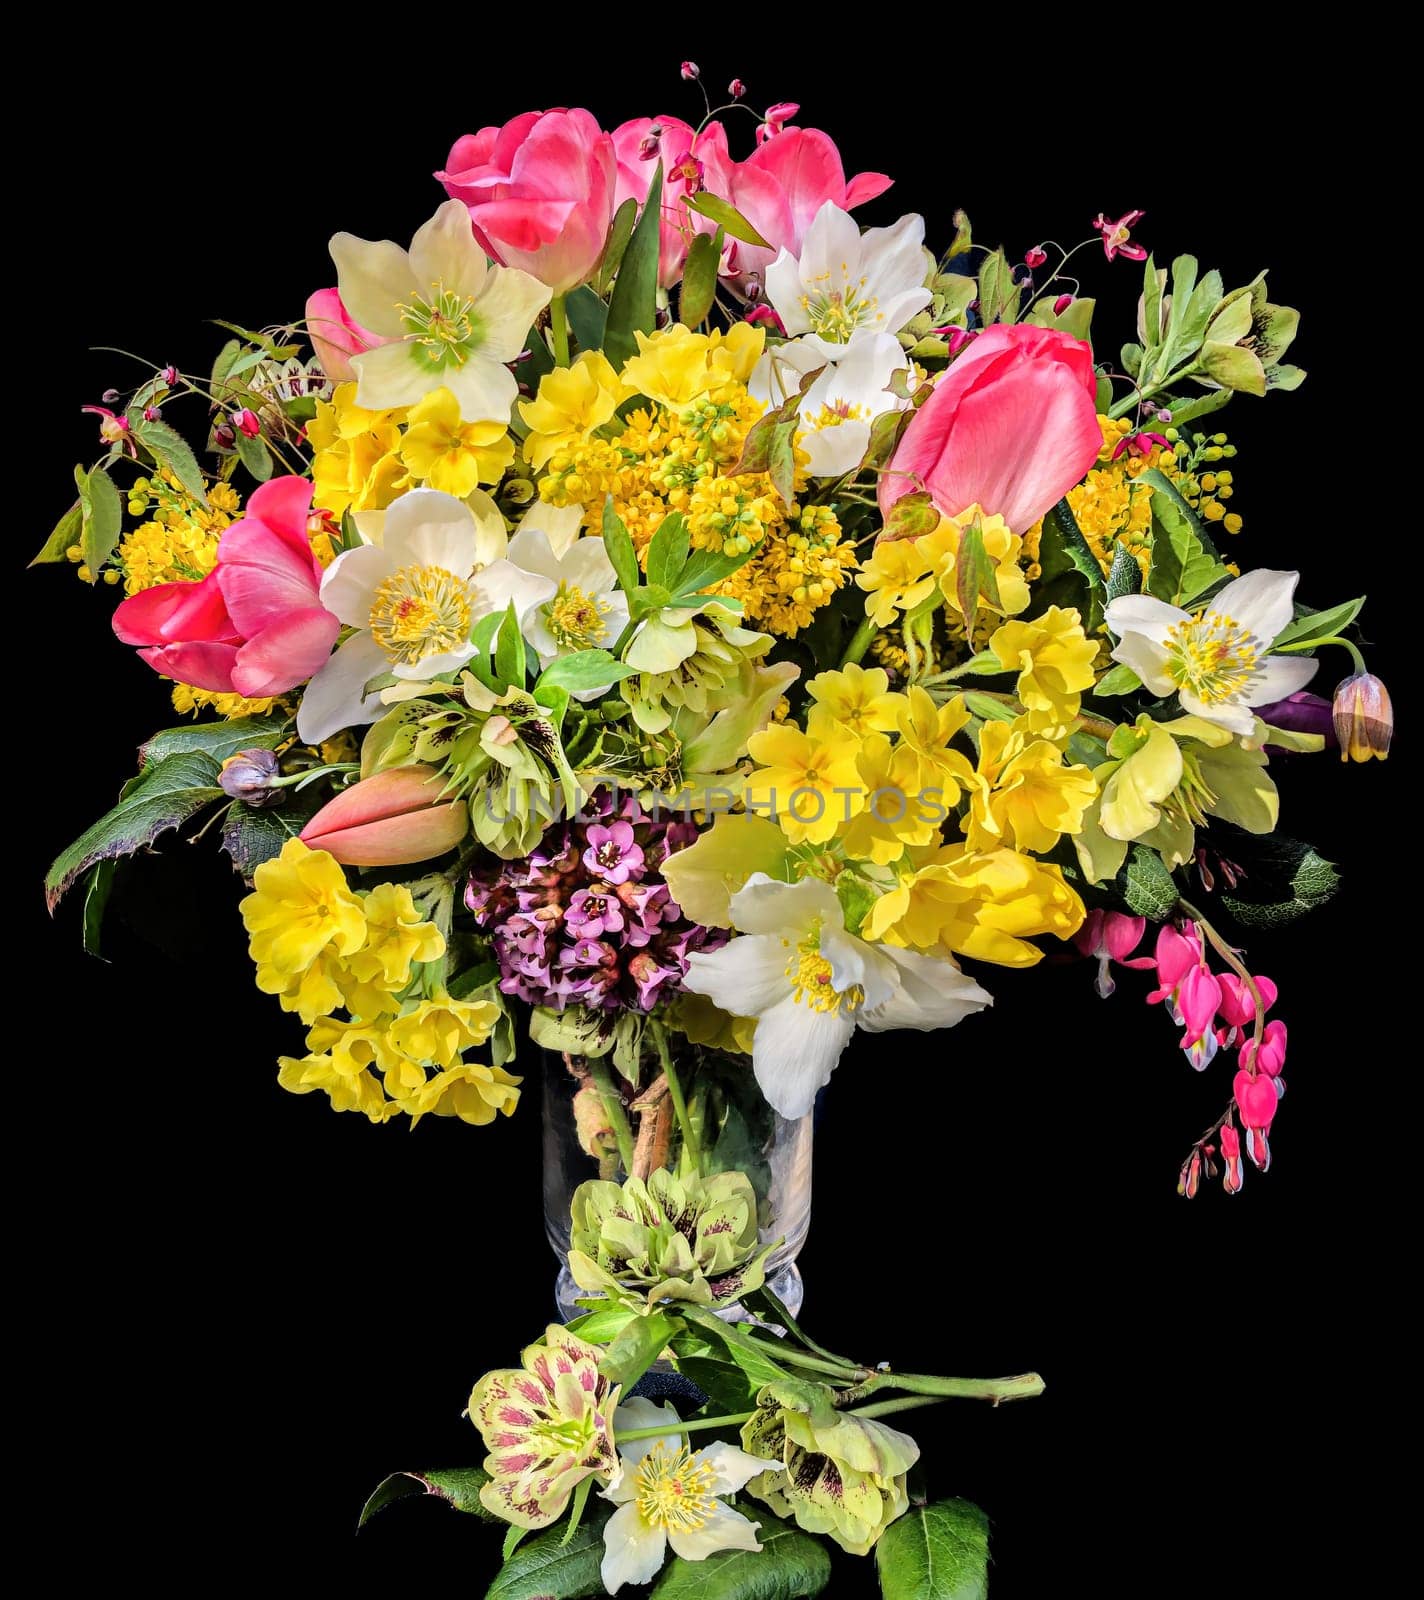 Romantic bouquet of the first garden flowers isolated on black background. The art of flower arranging